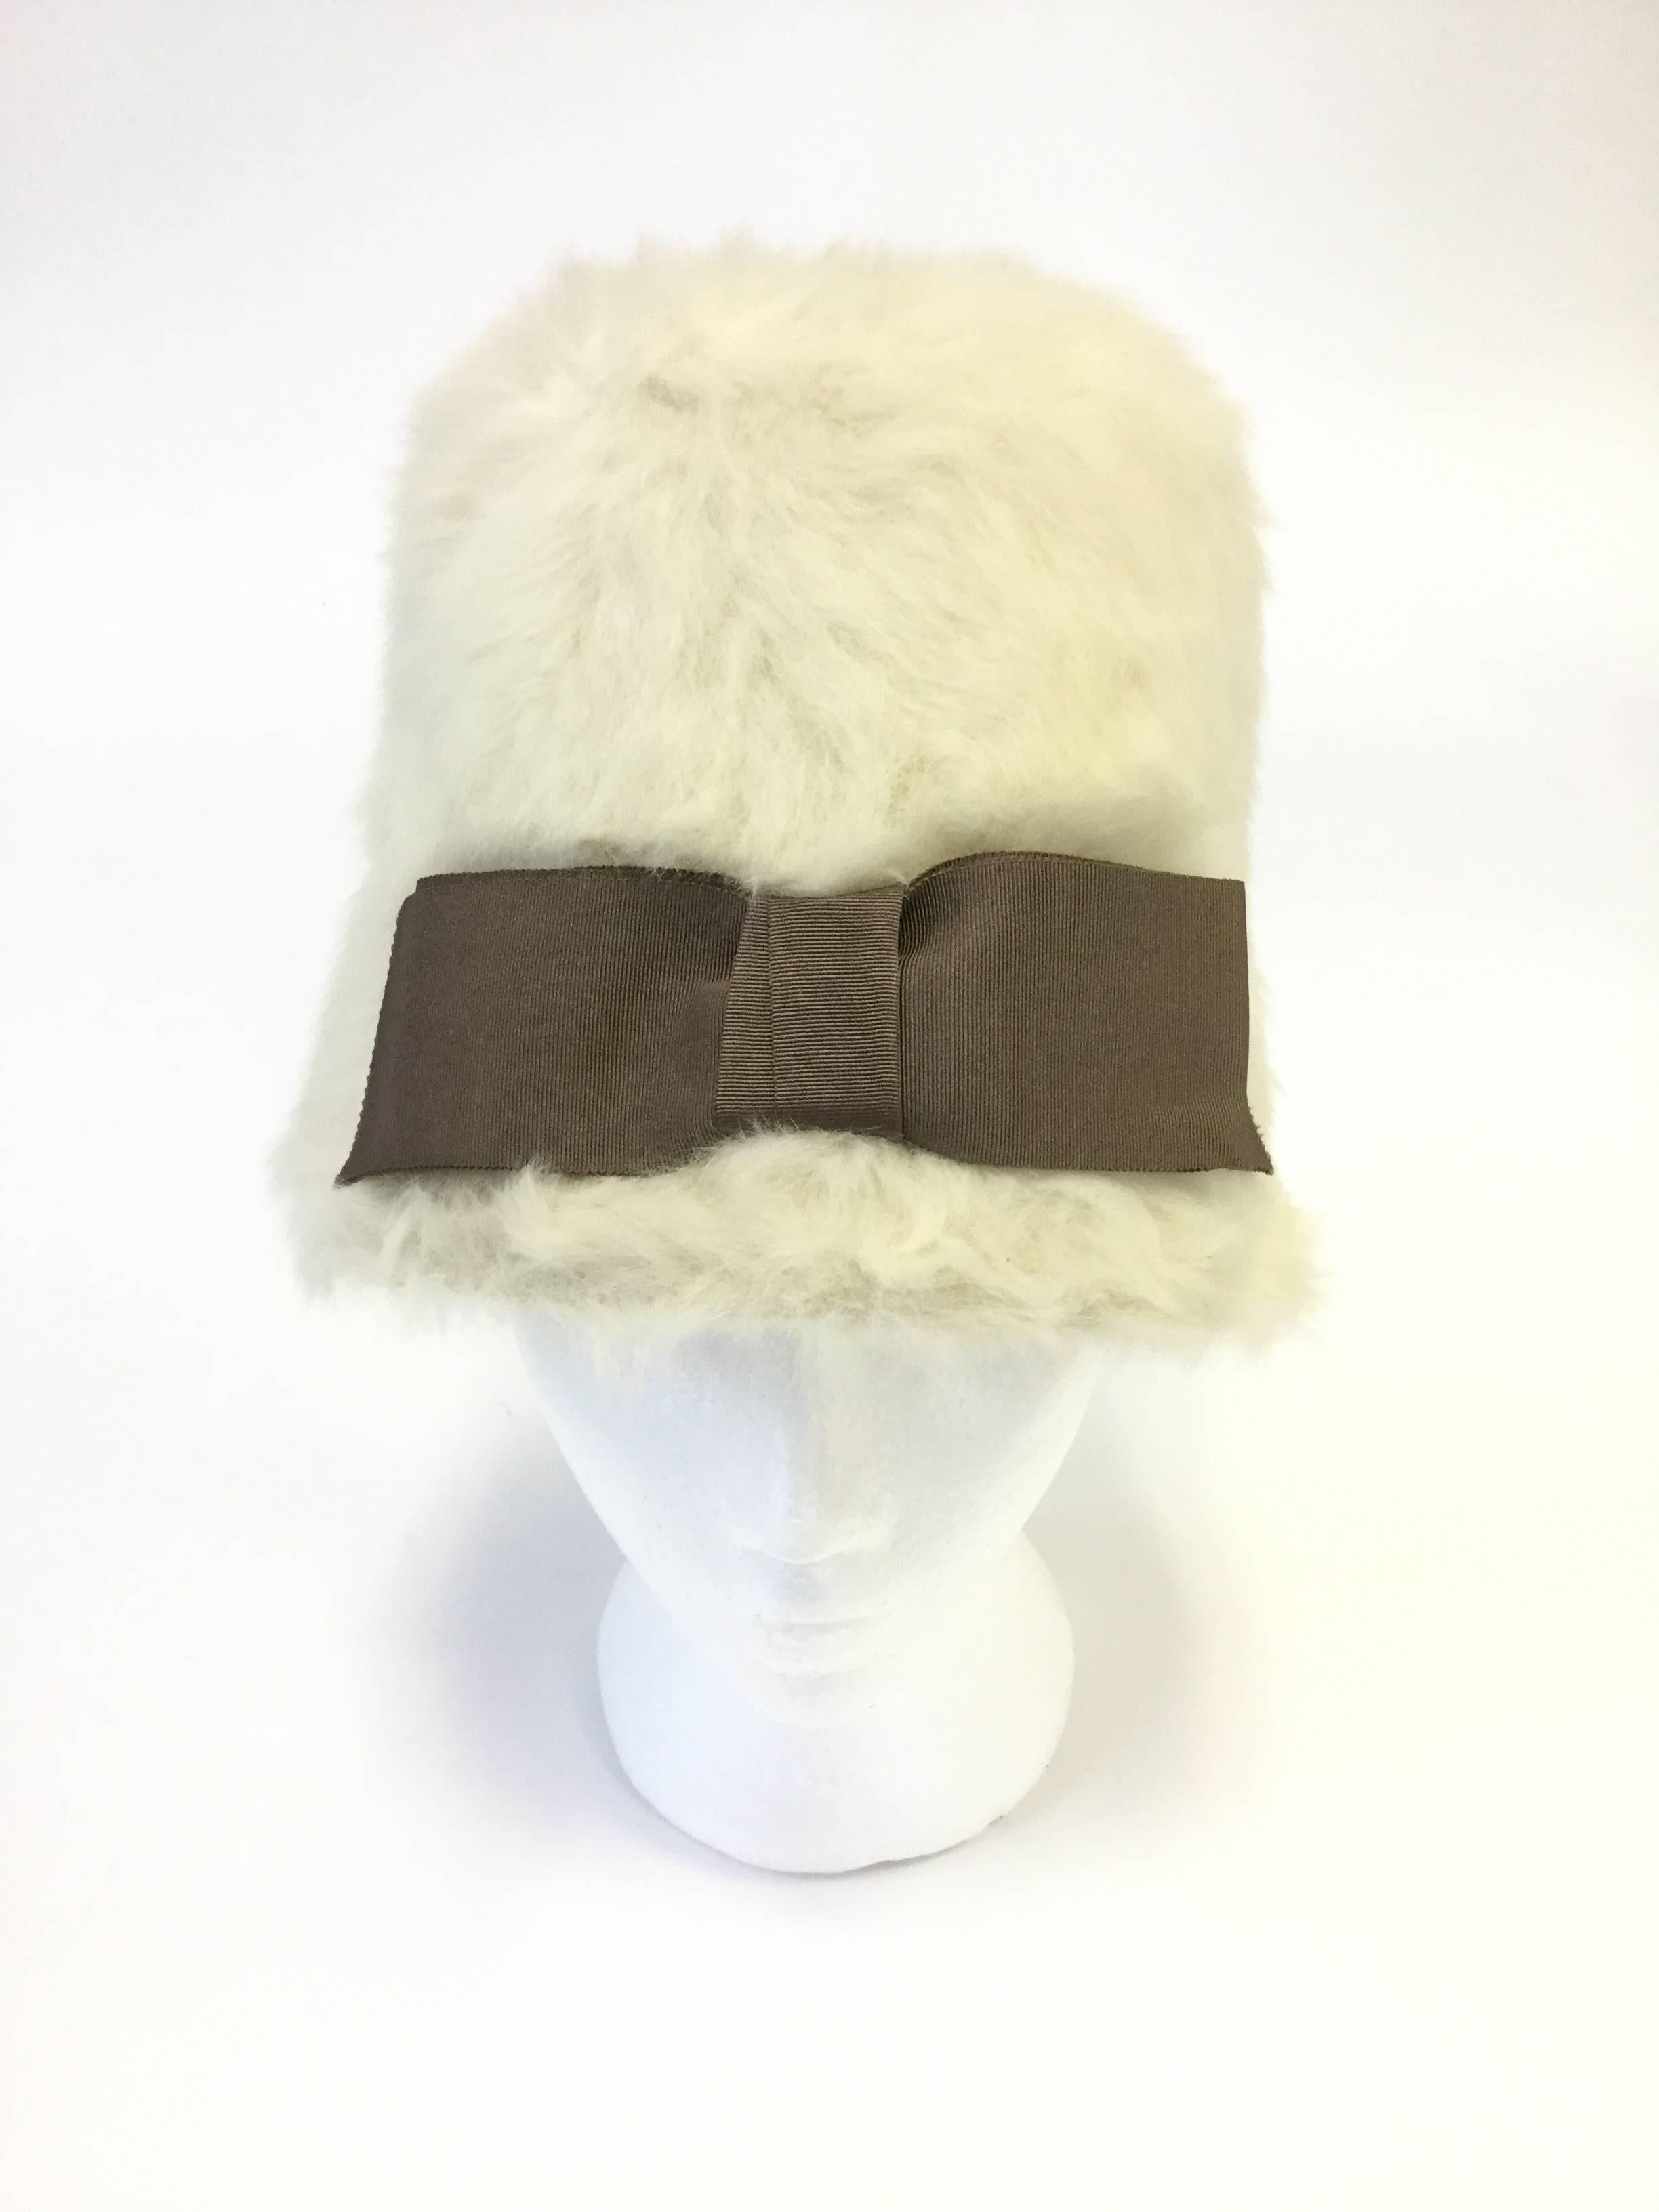 
Fantastic hat by Miss Dior. This fantastic Miss Dior hat by Christian Dior has an elongated cloche shape with a long crown and small, sloping brim. The hat has a soft white, plush, brushed cropped angora exterior, with a large olive accent bow. The